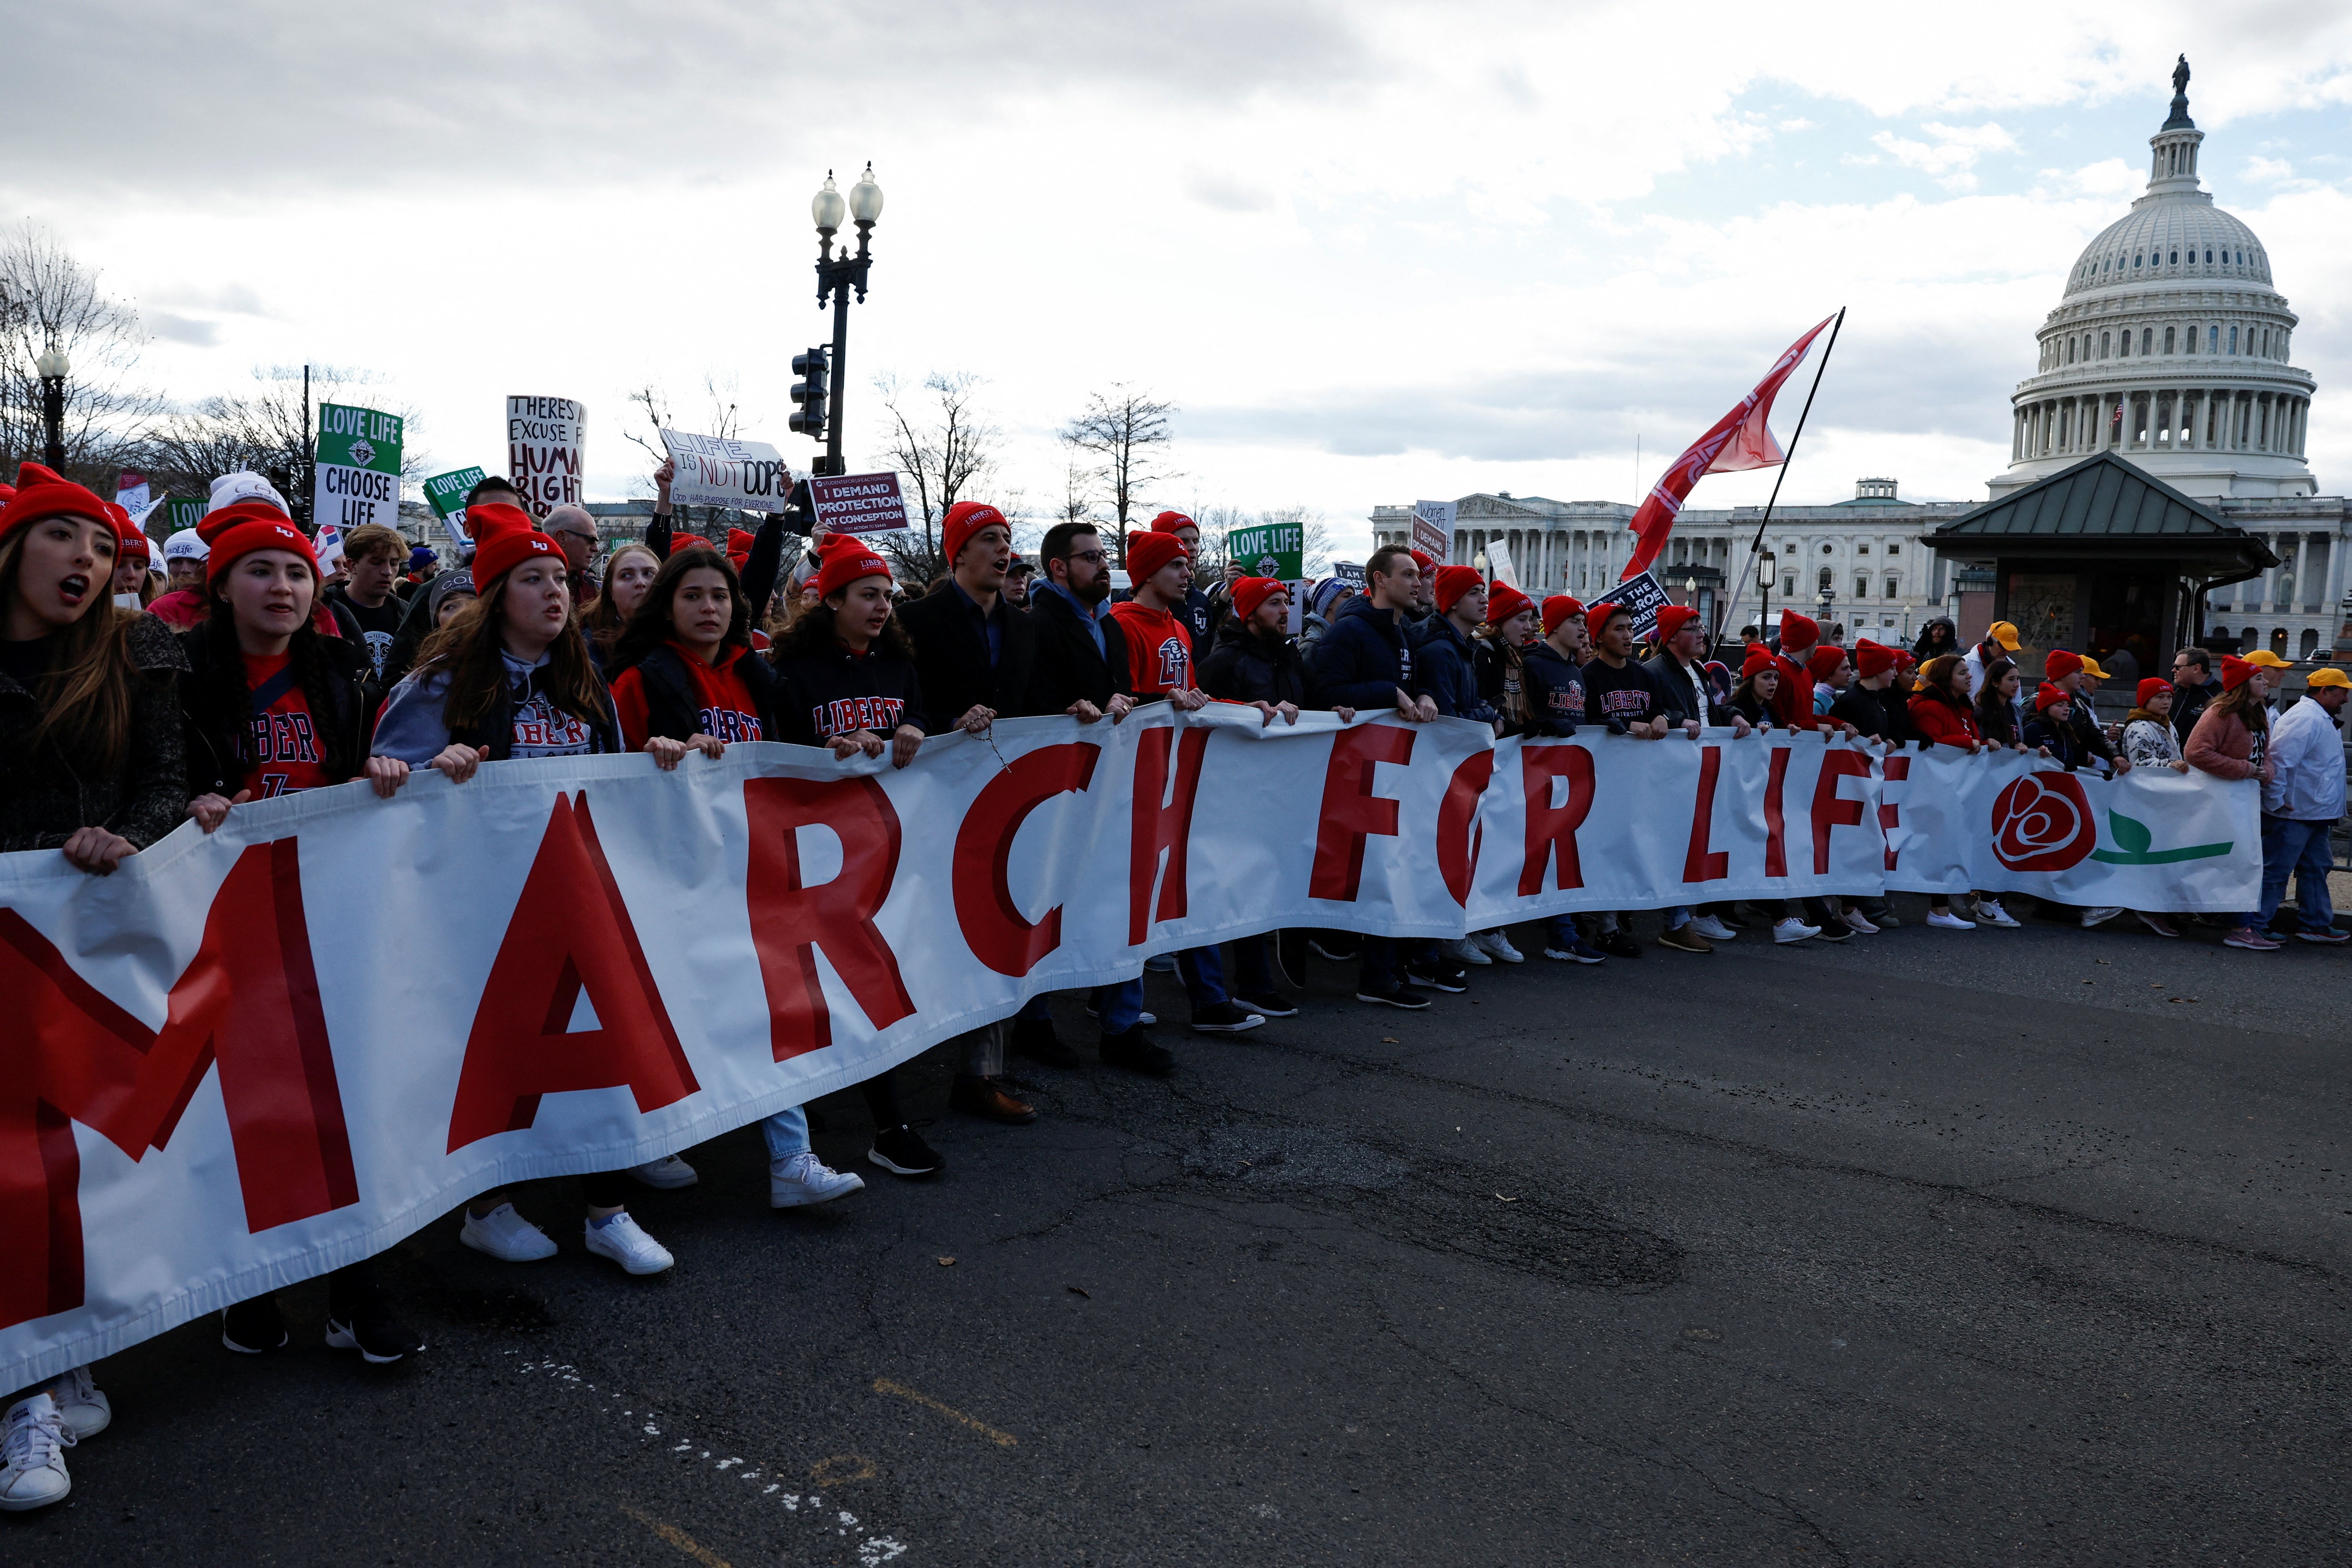 A group of people wearing red hats carry a long sign that says "March for Life."